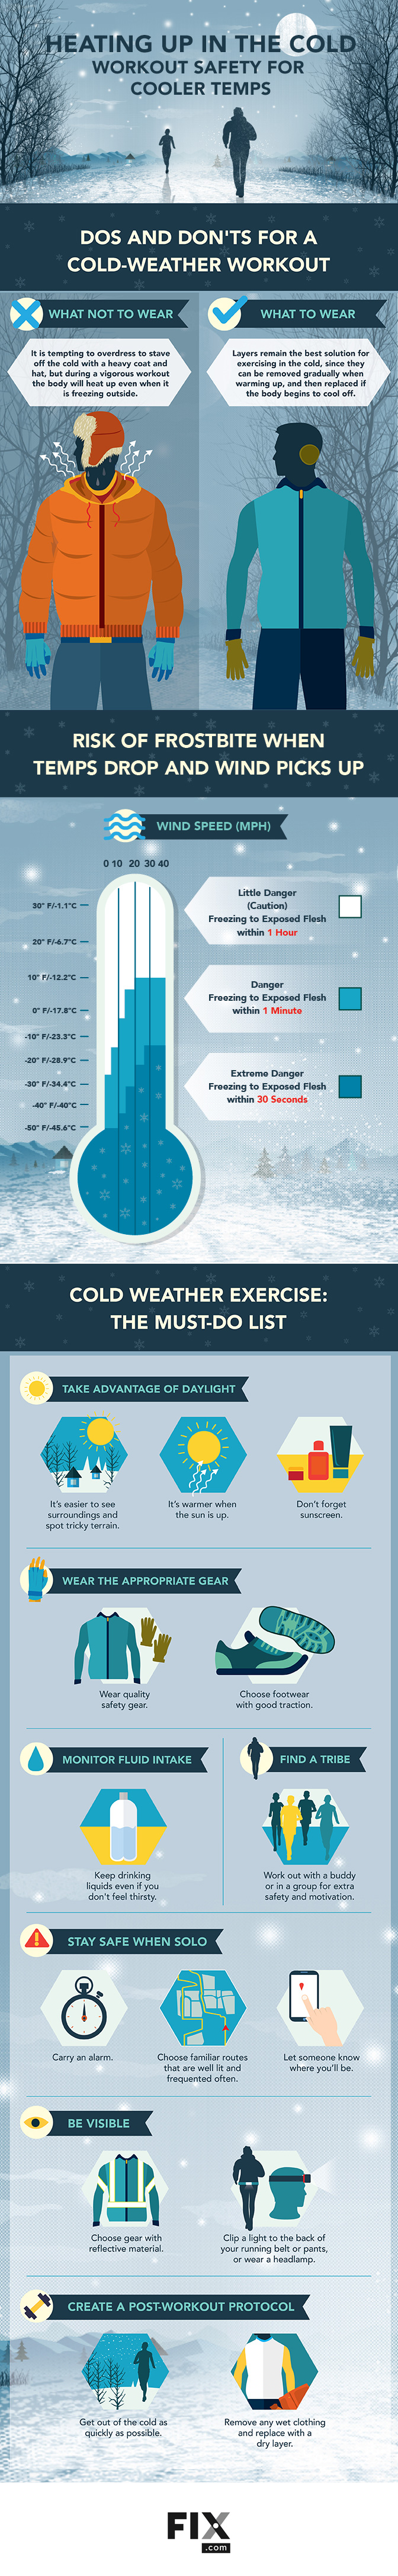 Tips for Working Out in Cold Weather vs. Hot Weather